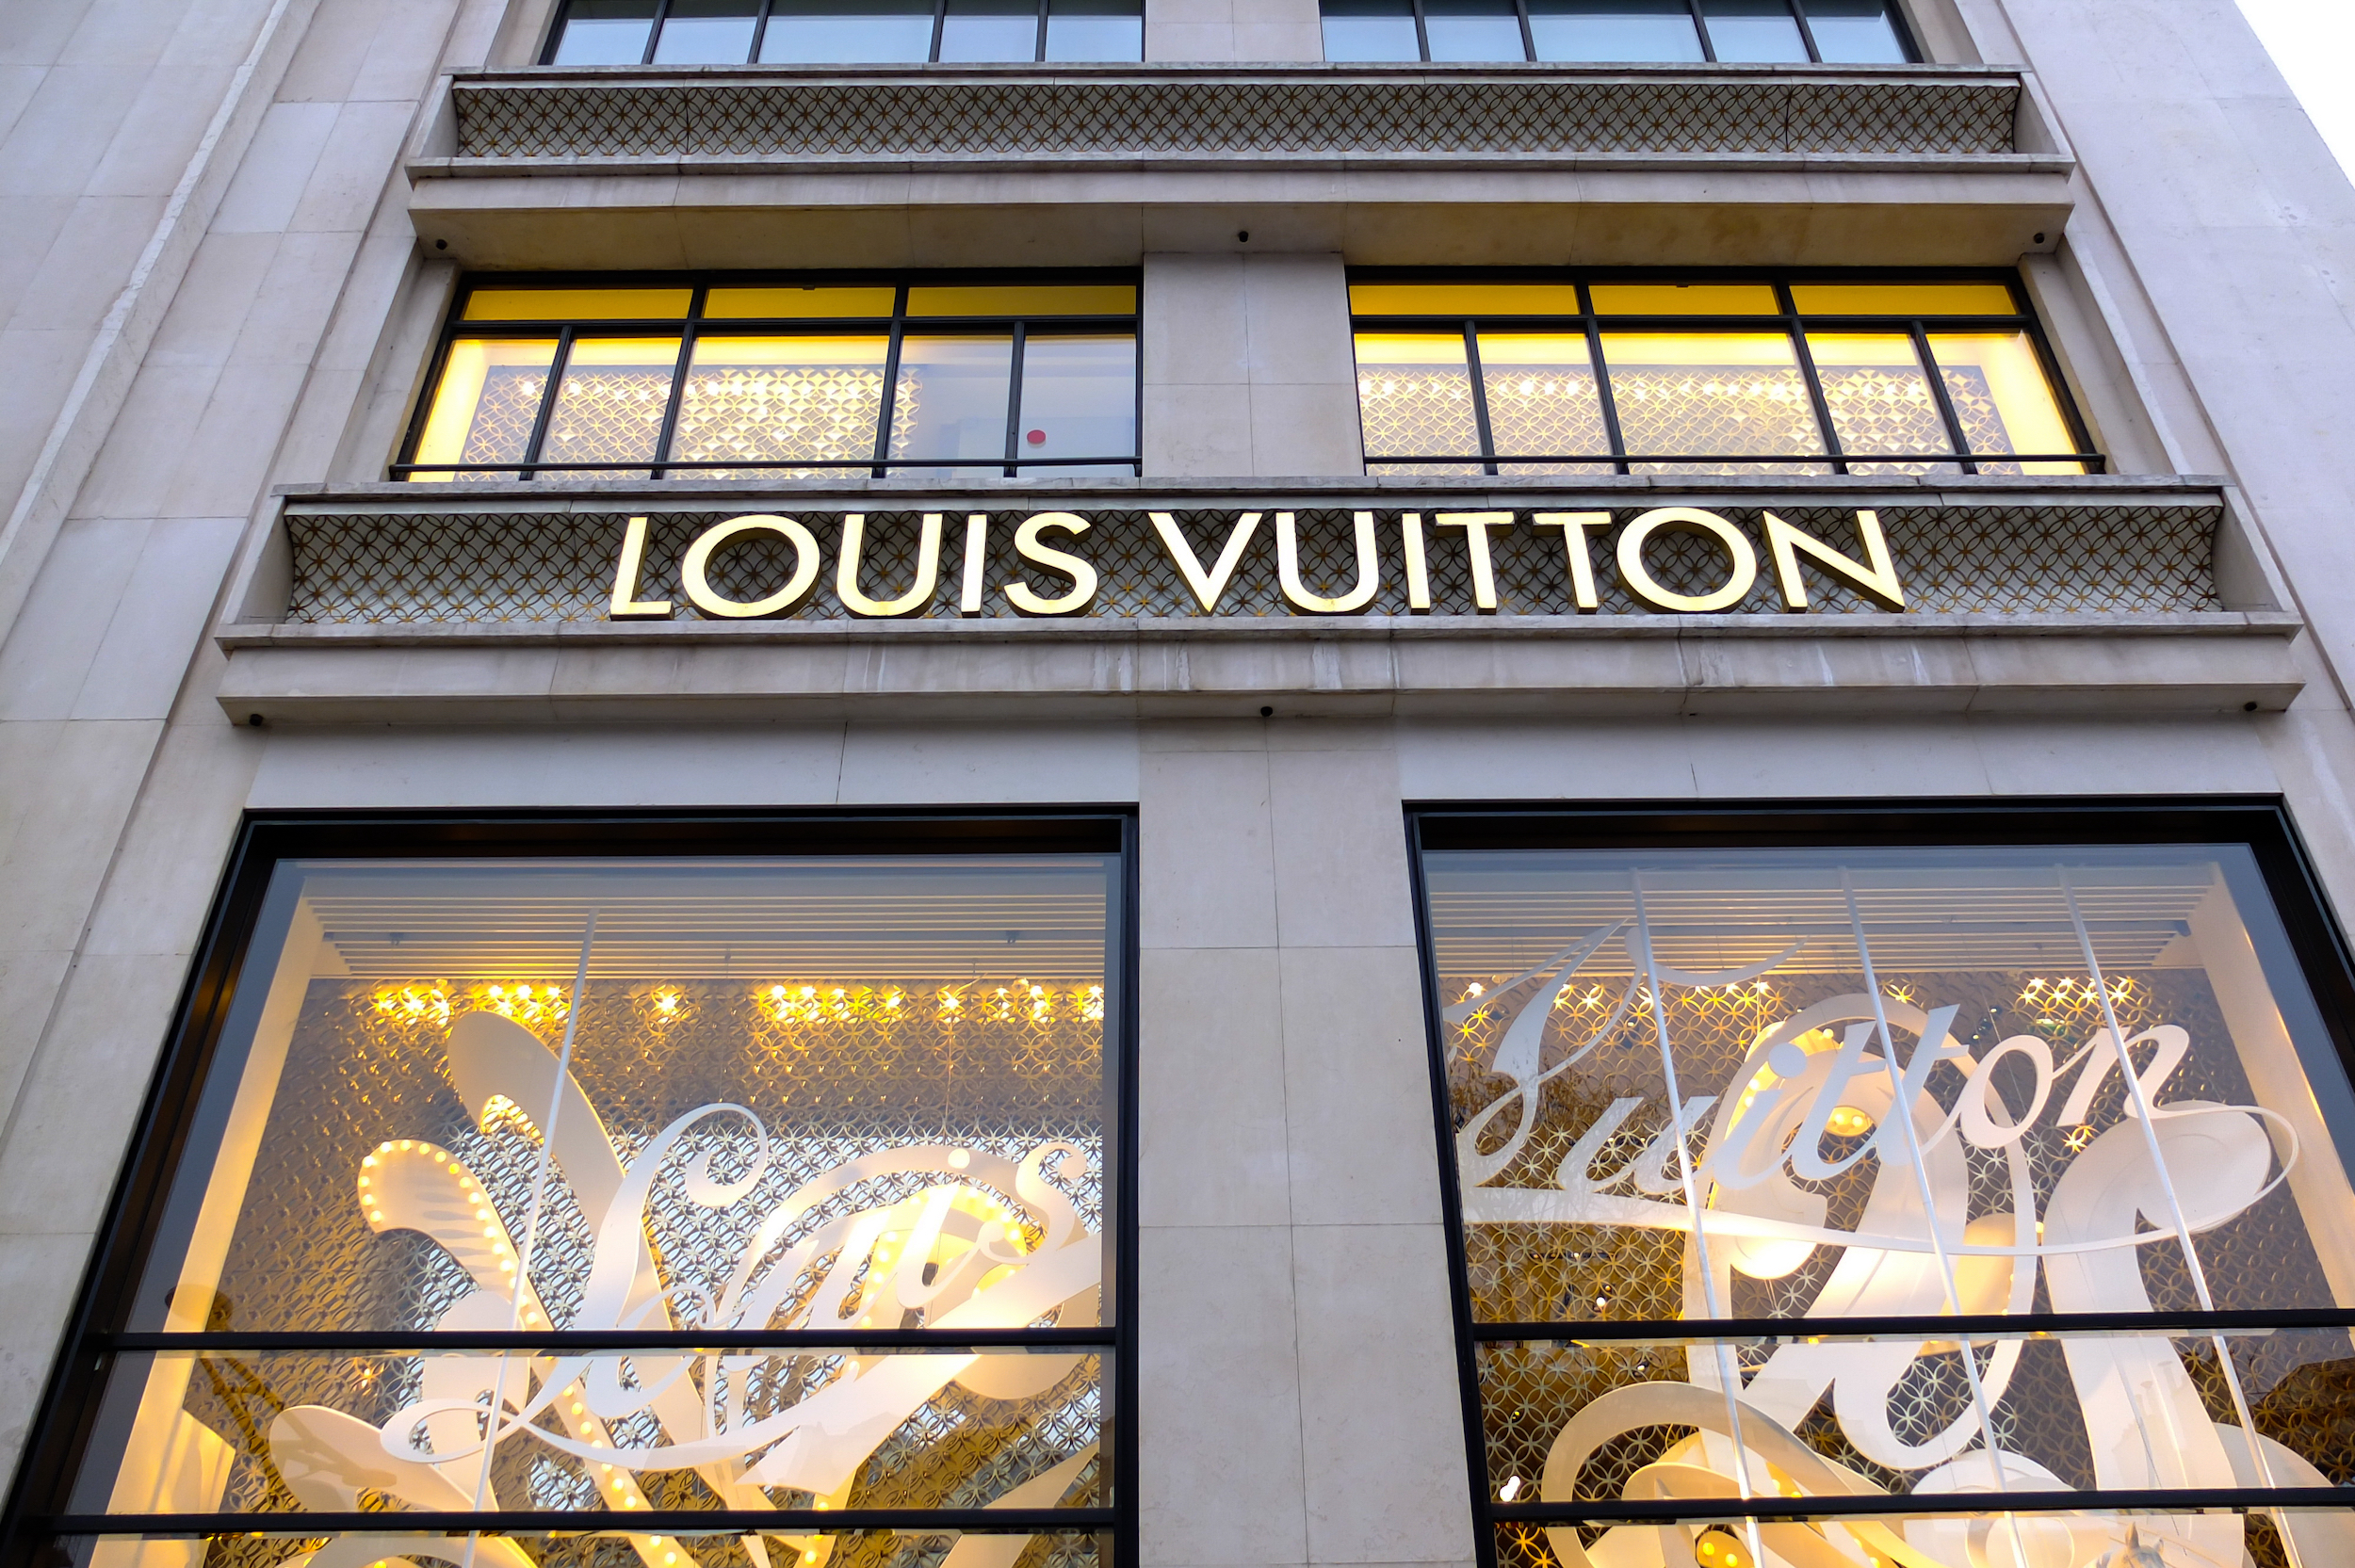 Which brand is better: Gucci or Louis Vuitton? - Quora